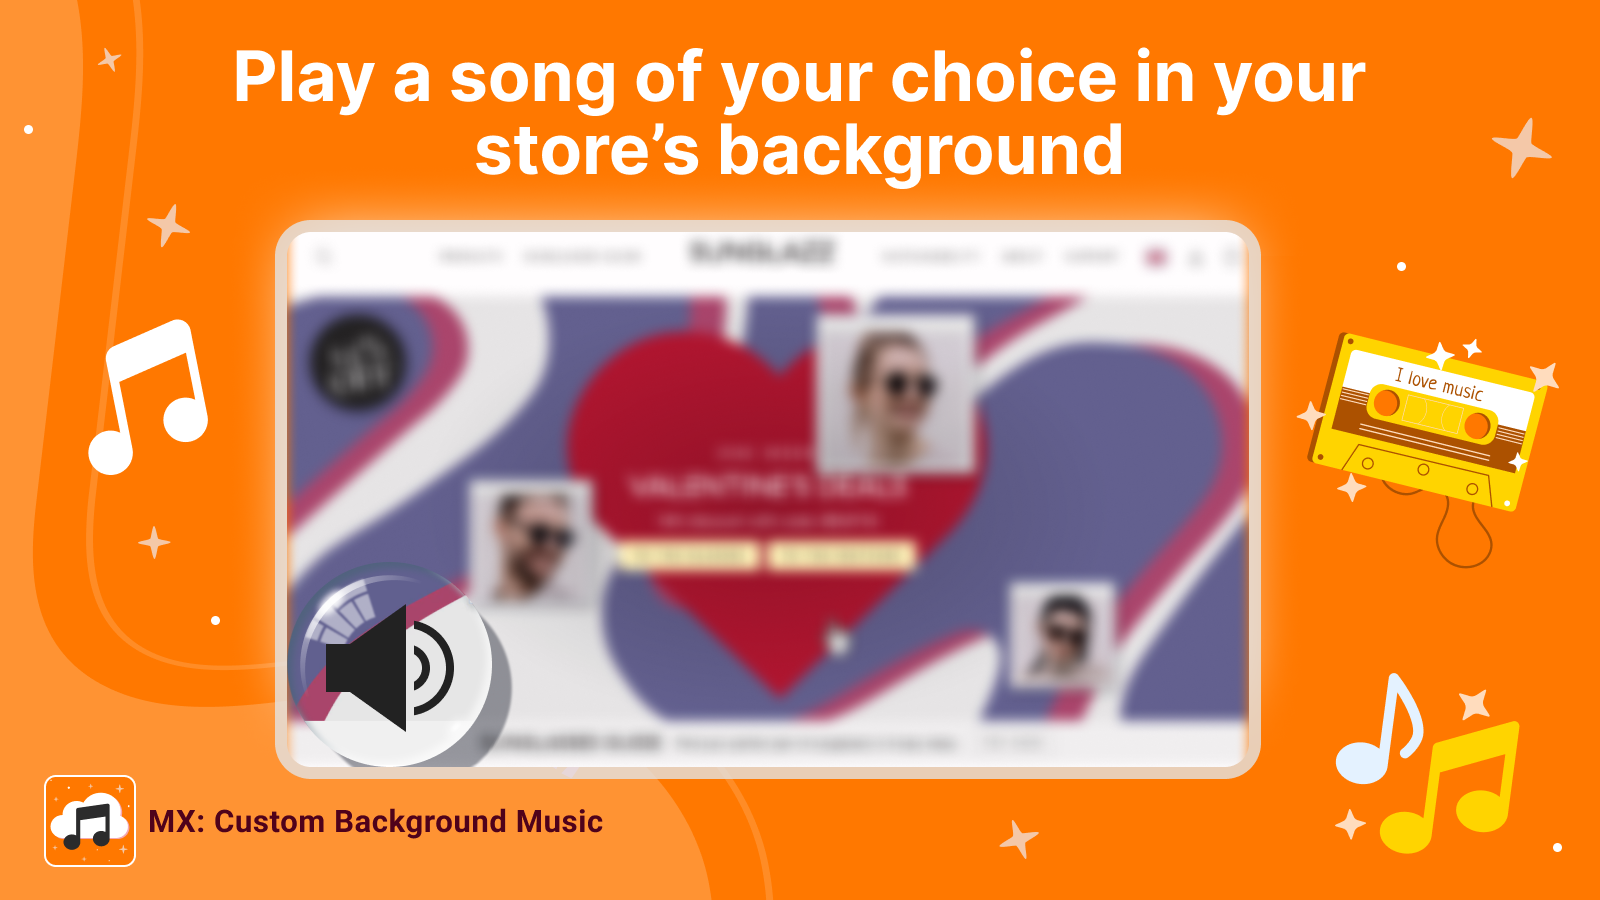 Play your own background music/audio/song in your store